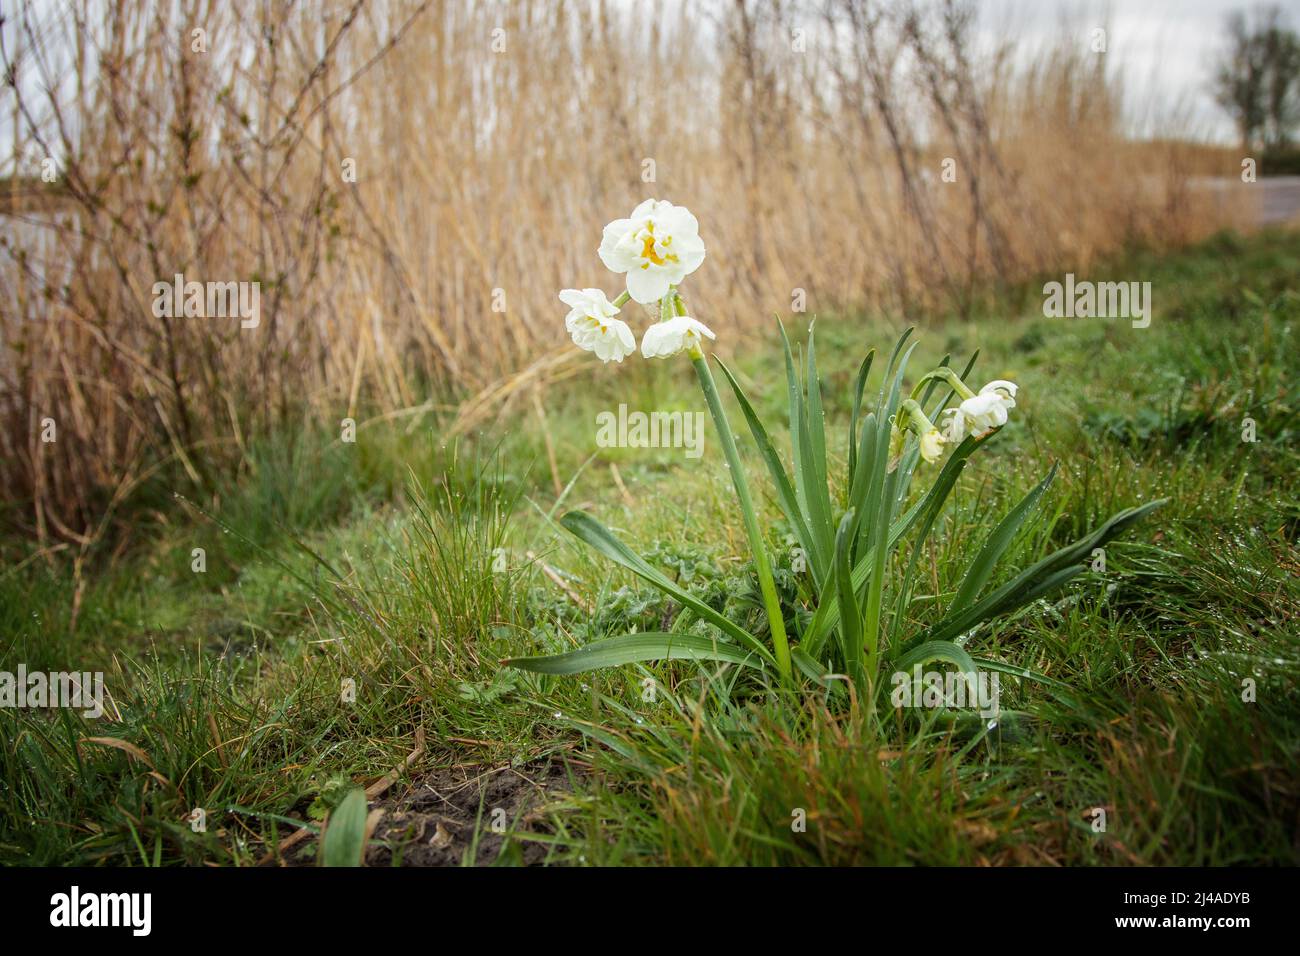 Wild white yellow ornge Double Narcissus 'Bridal Crown' , Narcissus, with raindrops on petals and stem leaves in a green ground of shaggy grasses Stock Photo